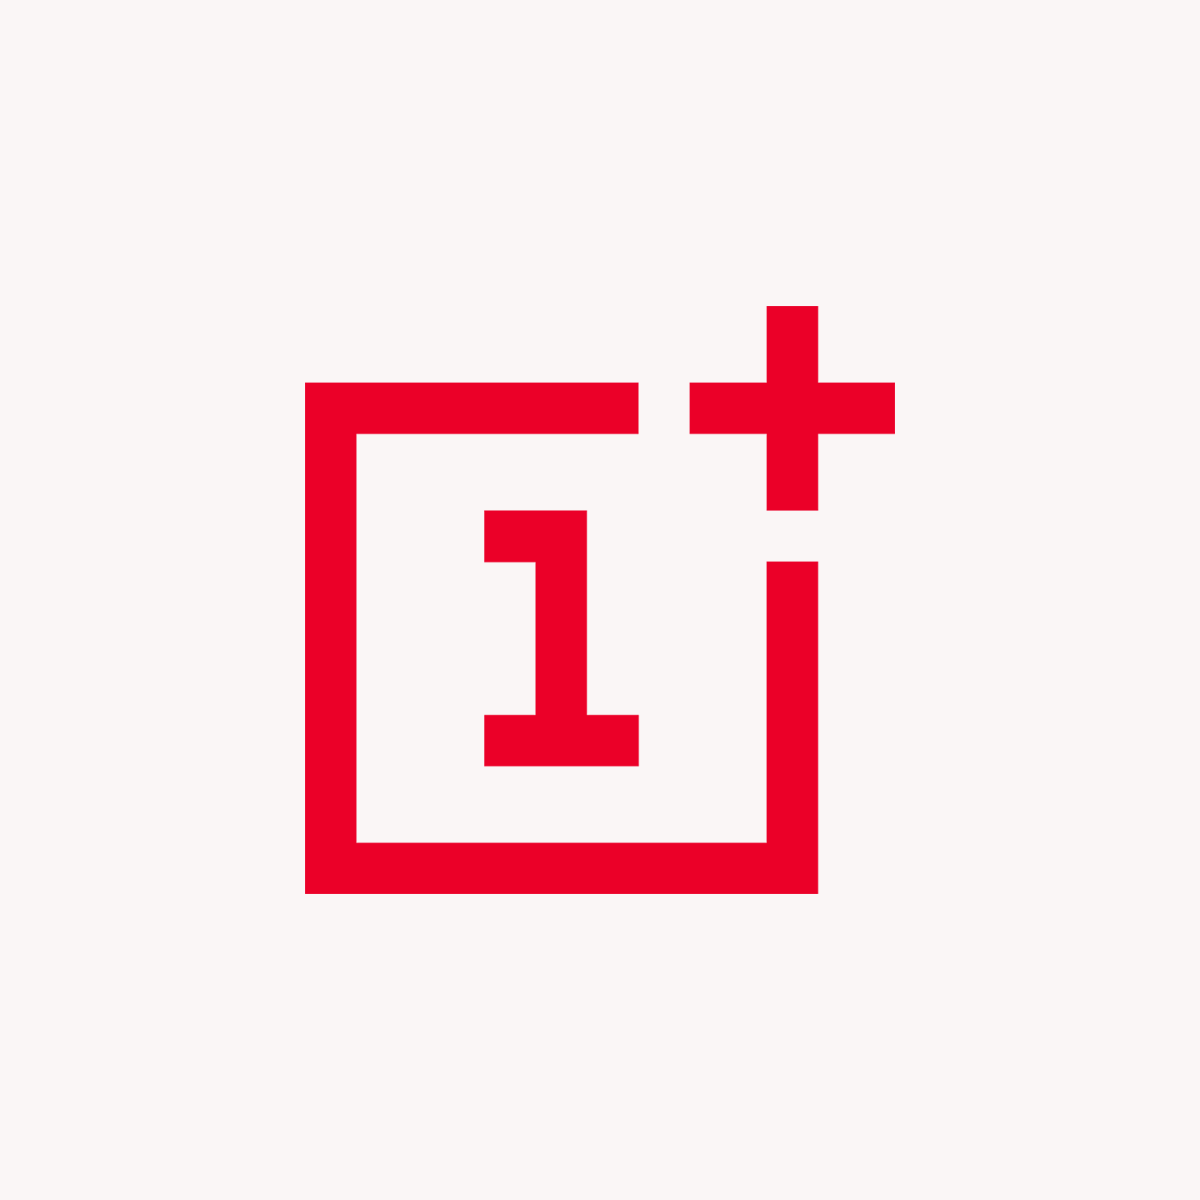 Red Block with White a Logo - Never Settle - OnePlus (United States)